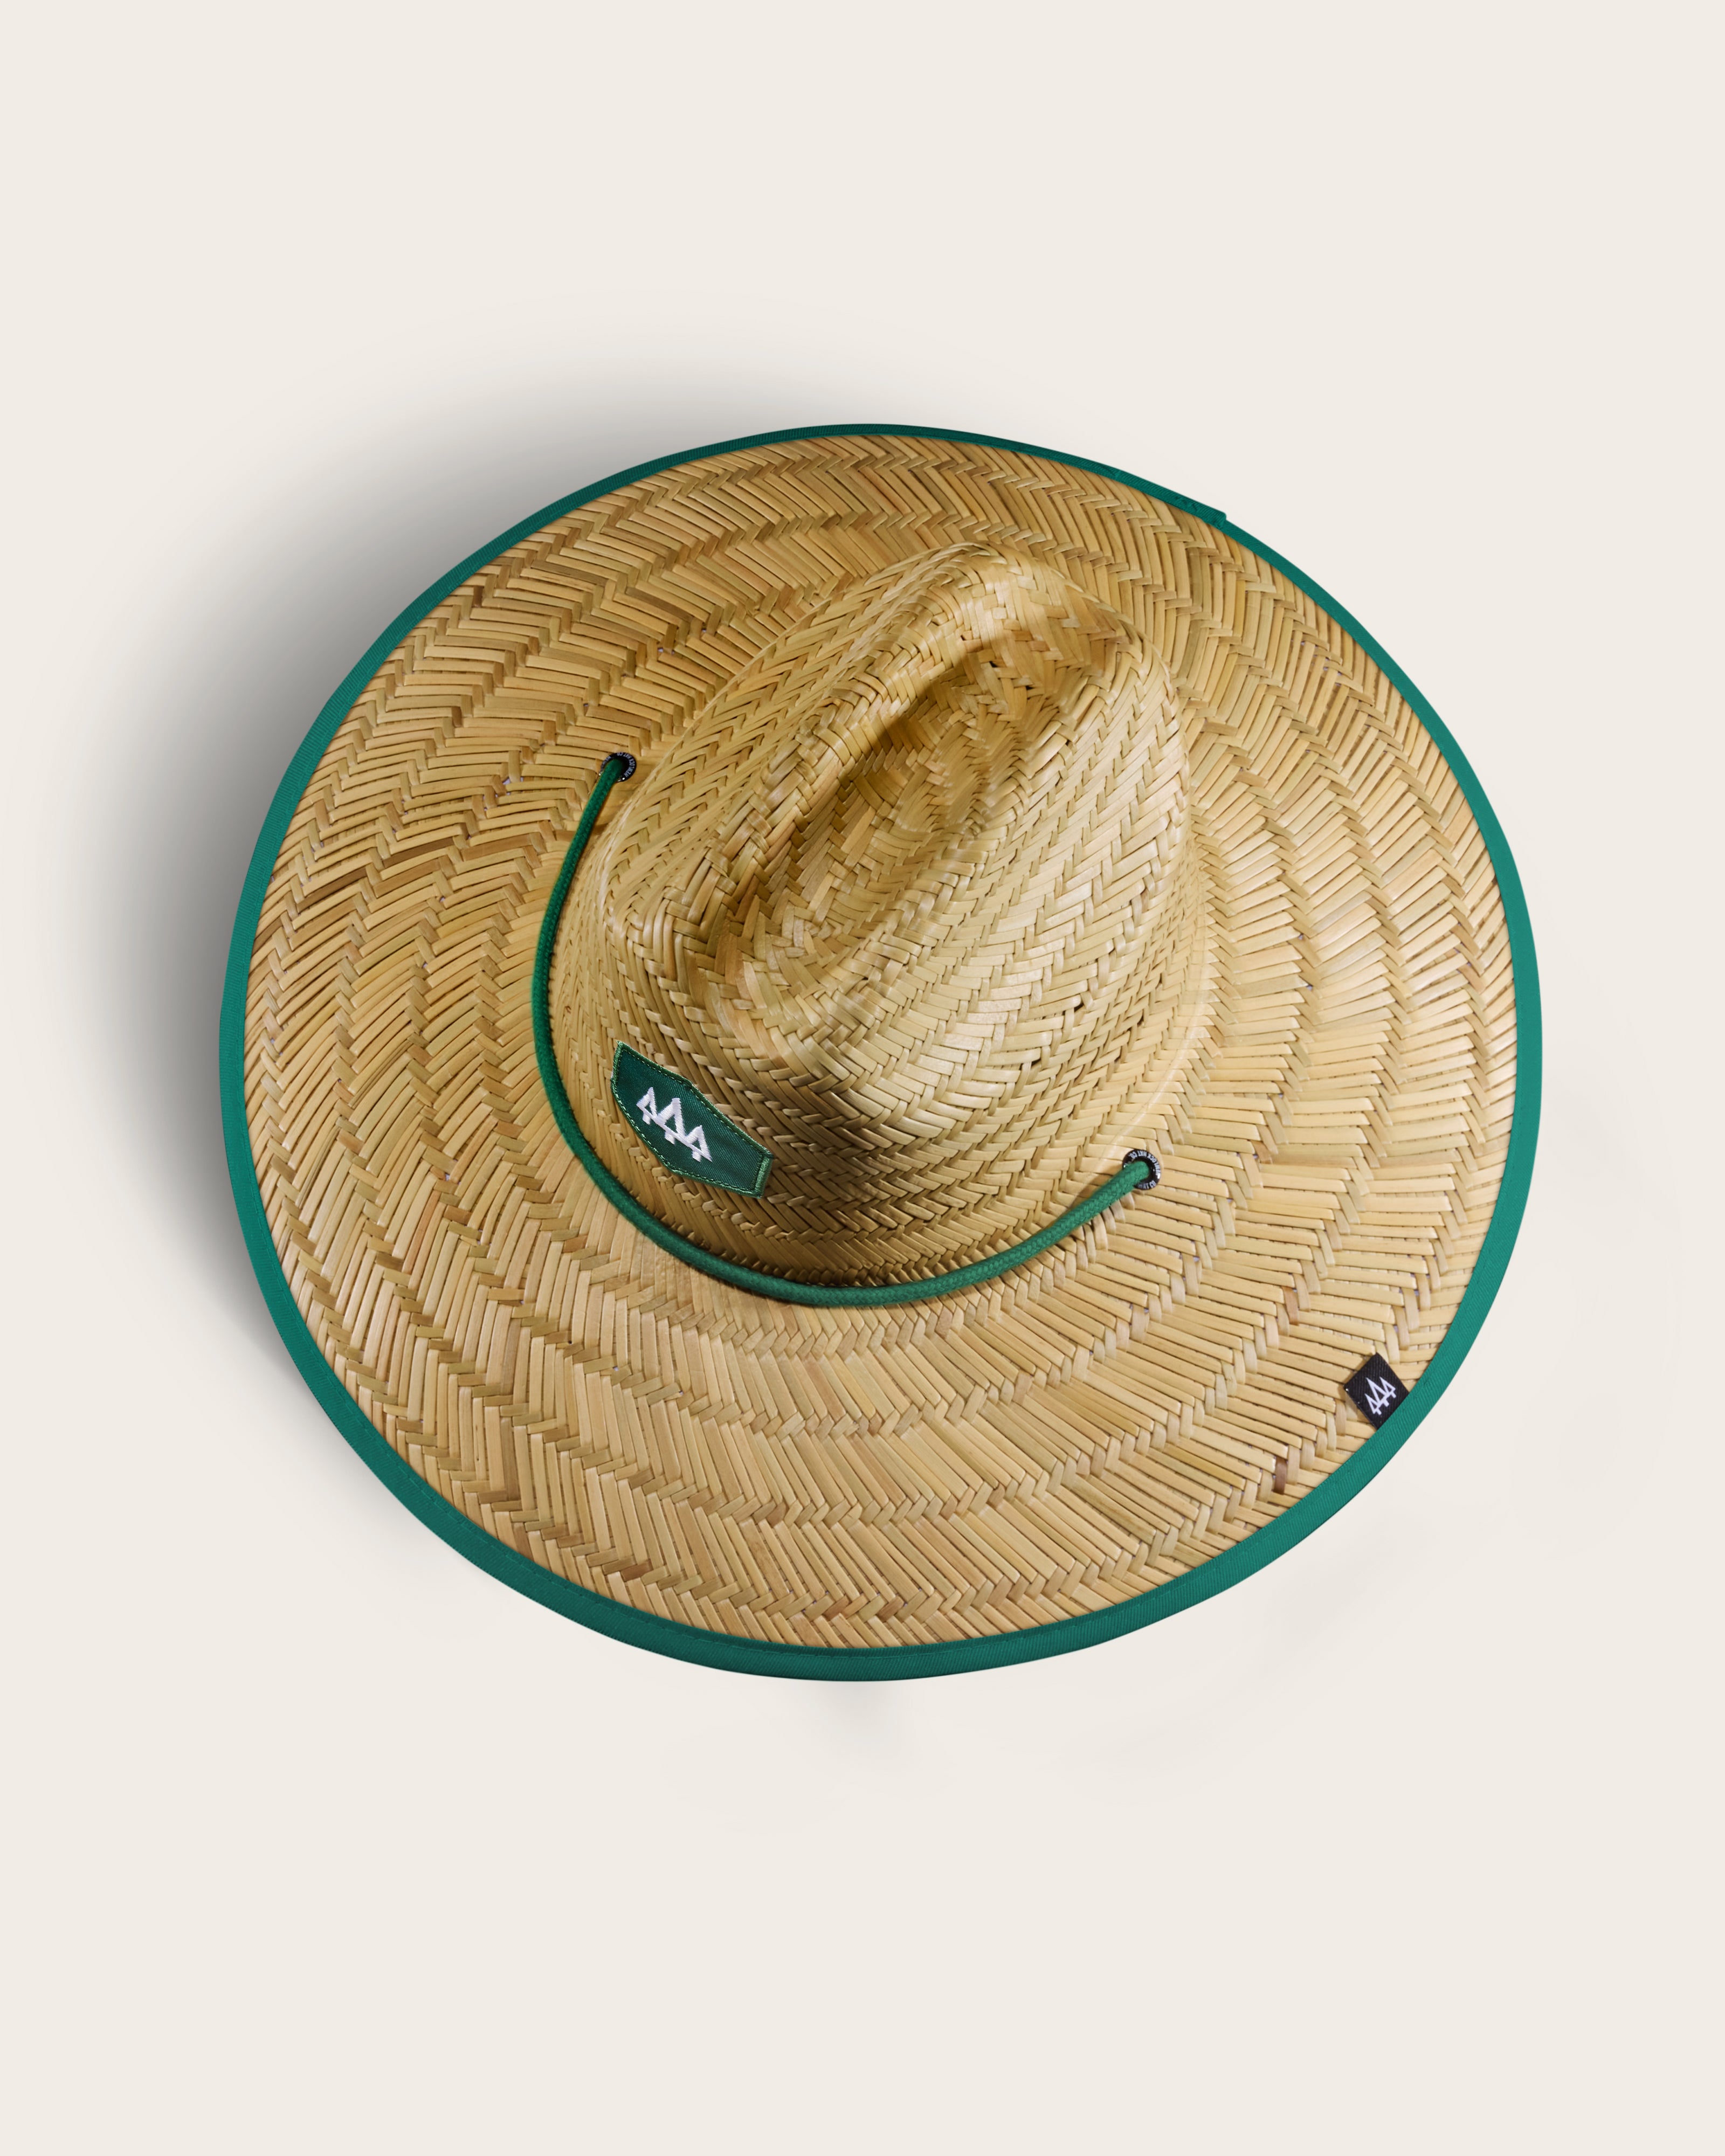 Hemlock Emerald straw lifeguard hat with emerald color top of hat